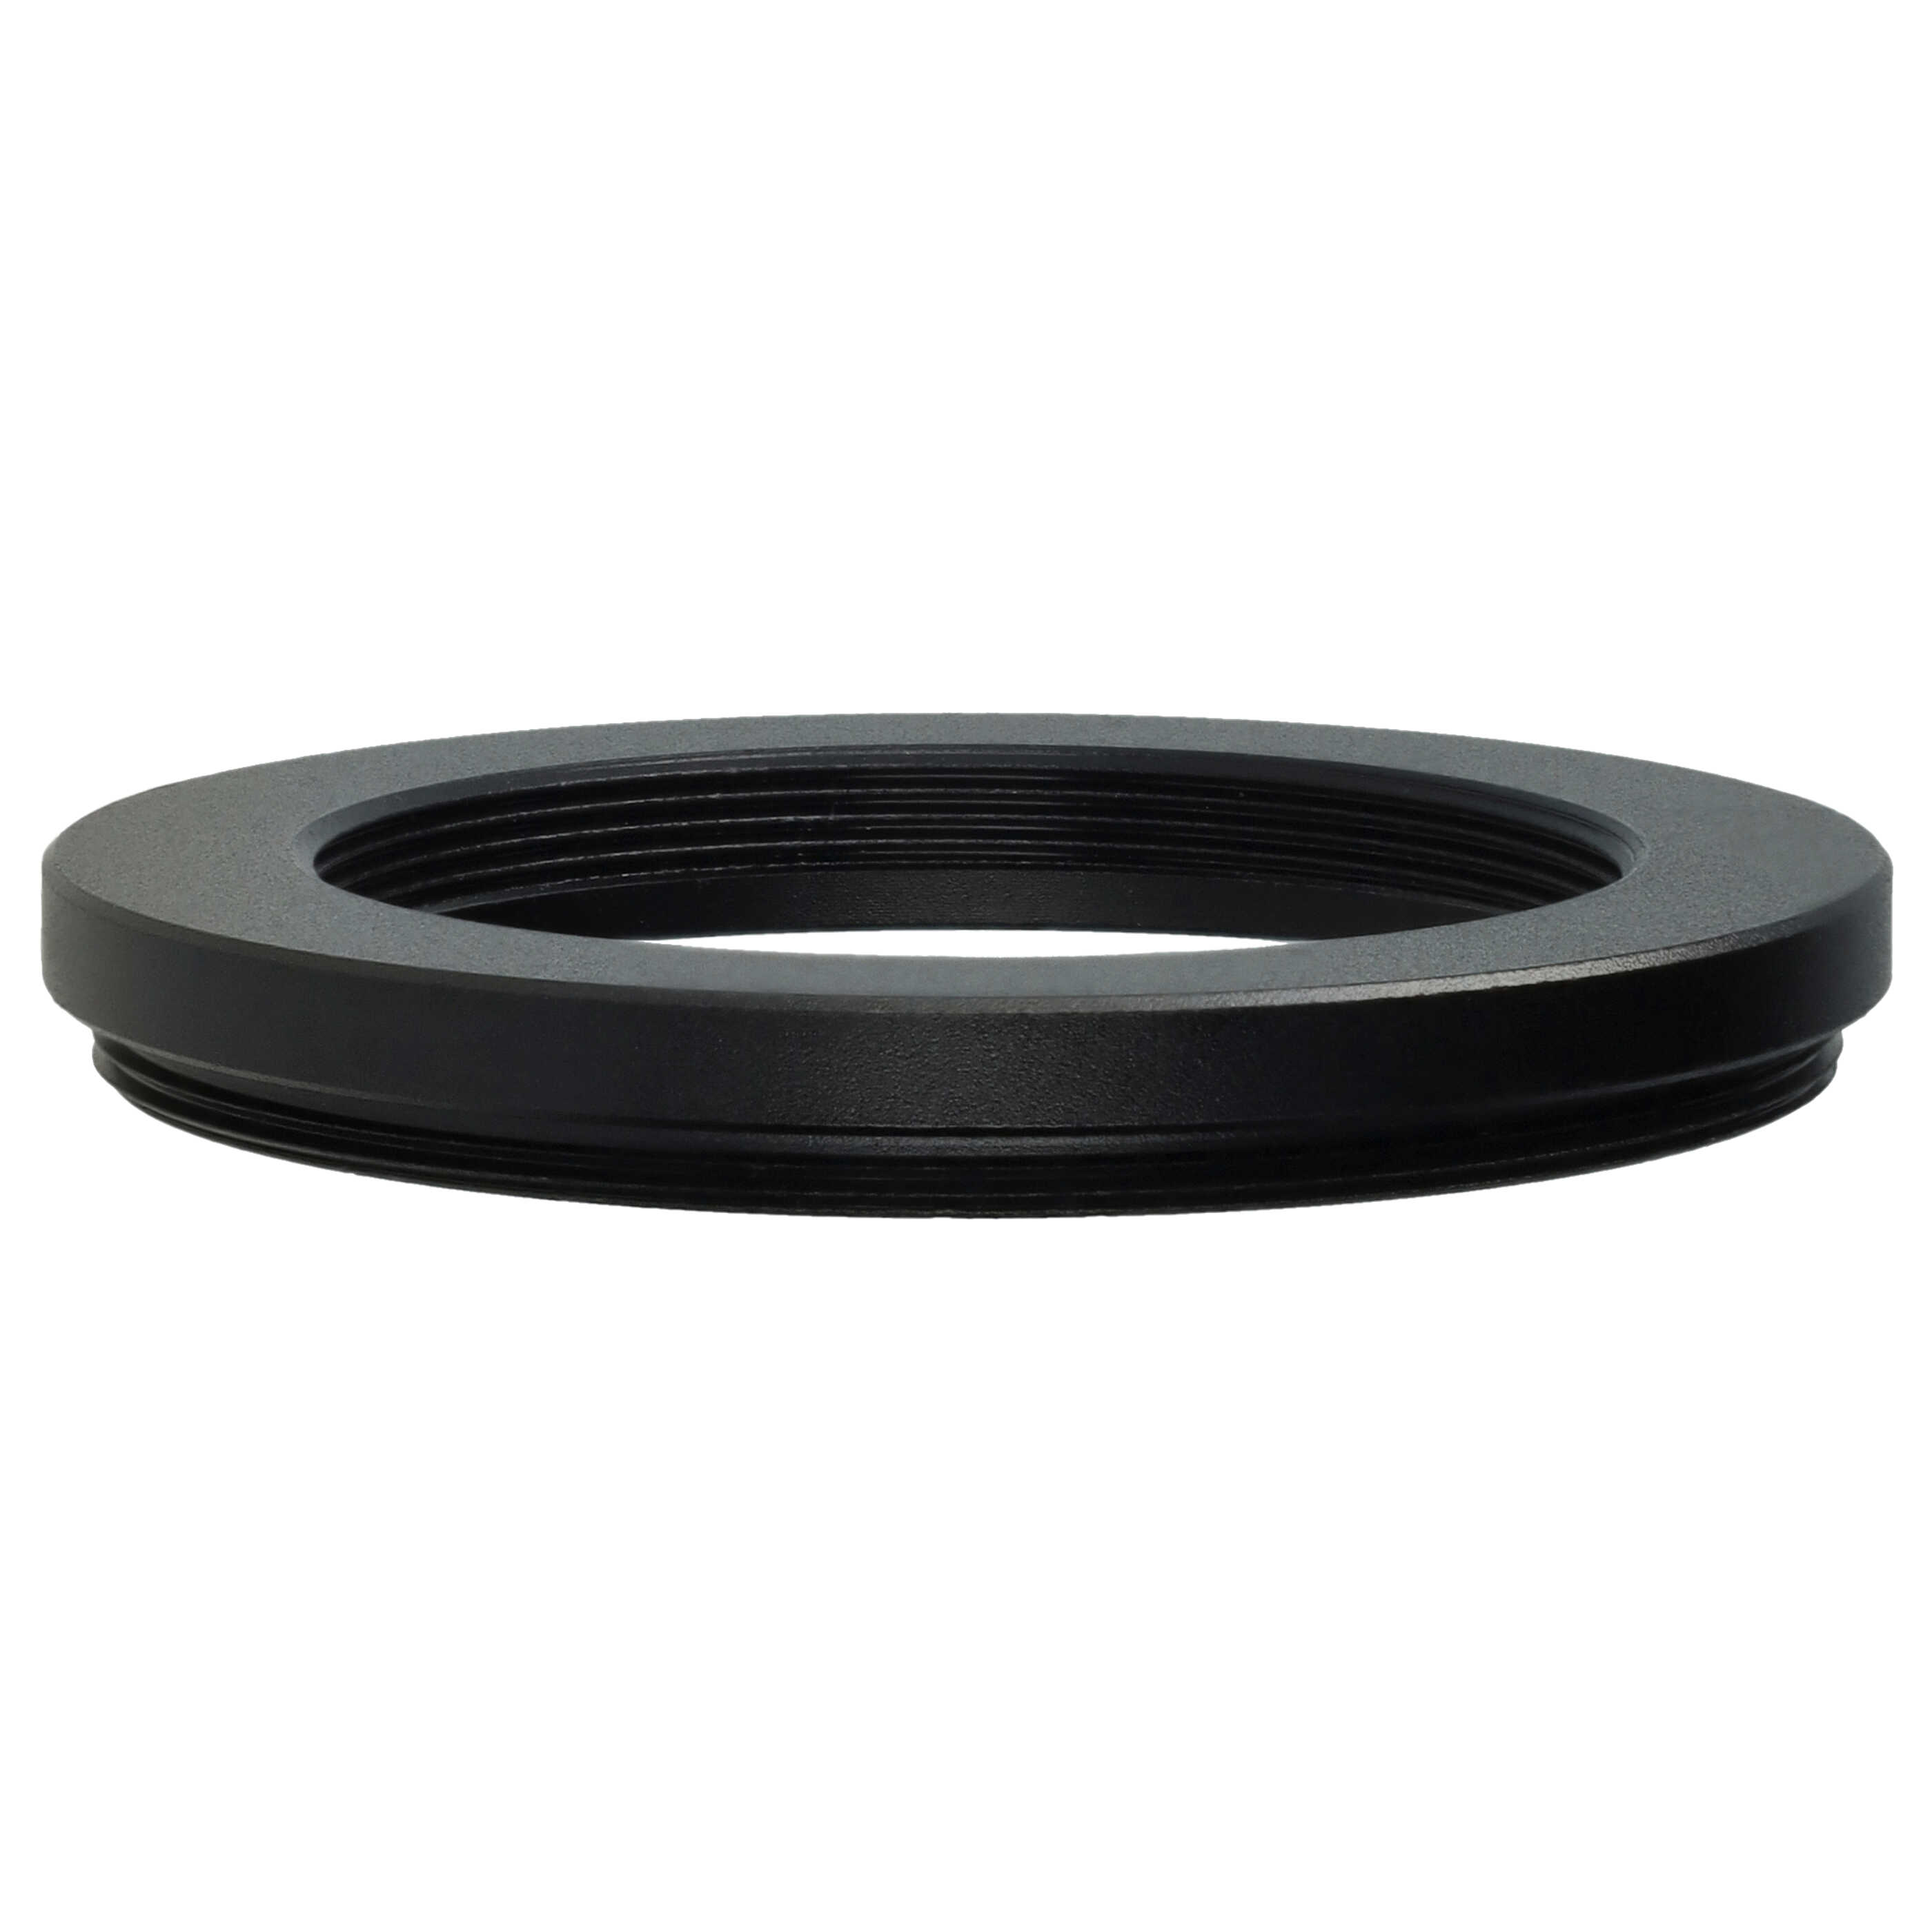 Step-Down Ring Adapter from 49 mm to 37 mm for various Camera Lenses